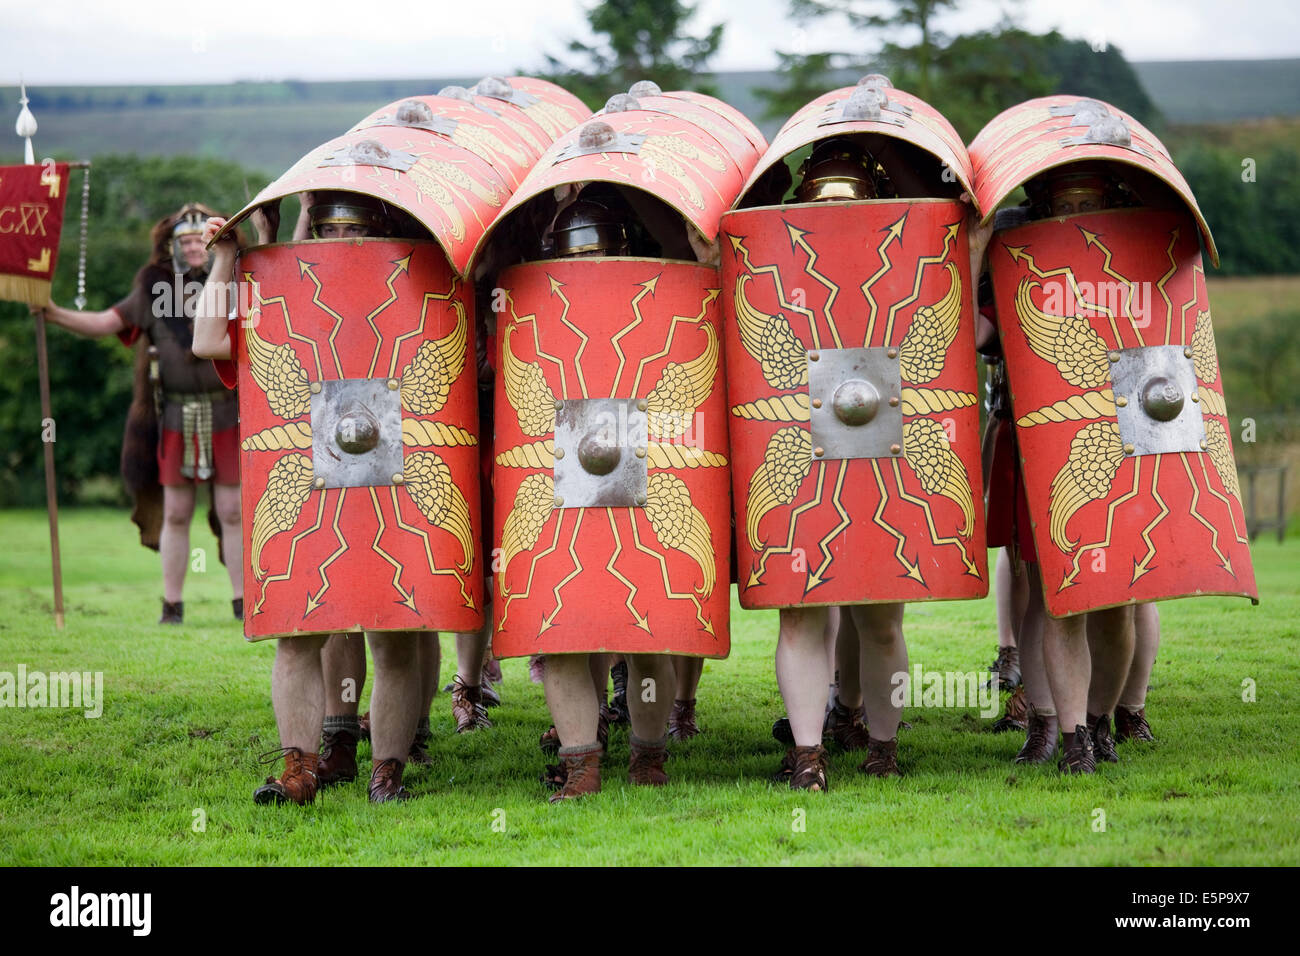 A  re-enactment  of typical Roman weapons and tactics given at the site of Vindolanda Roman Fort in Northumberland, England. Stock Photo